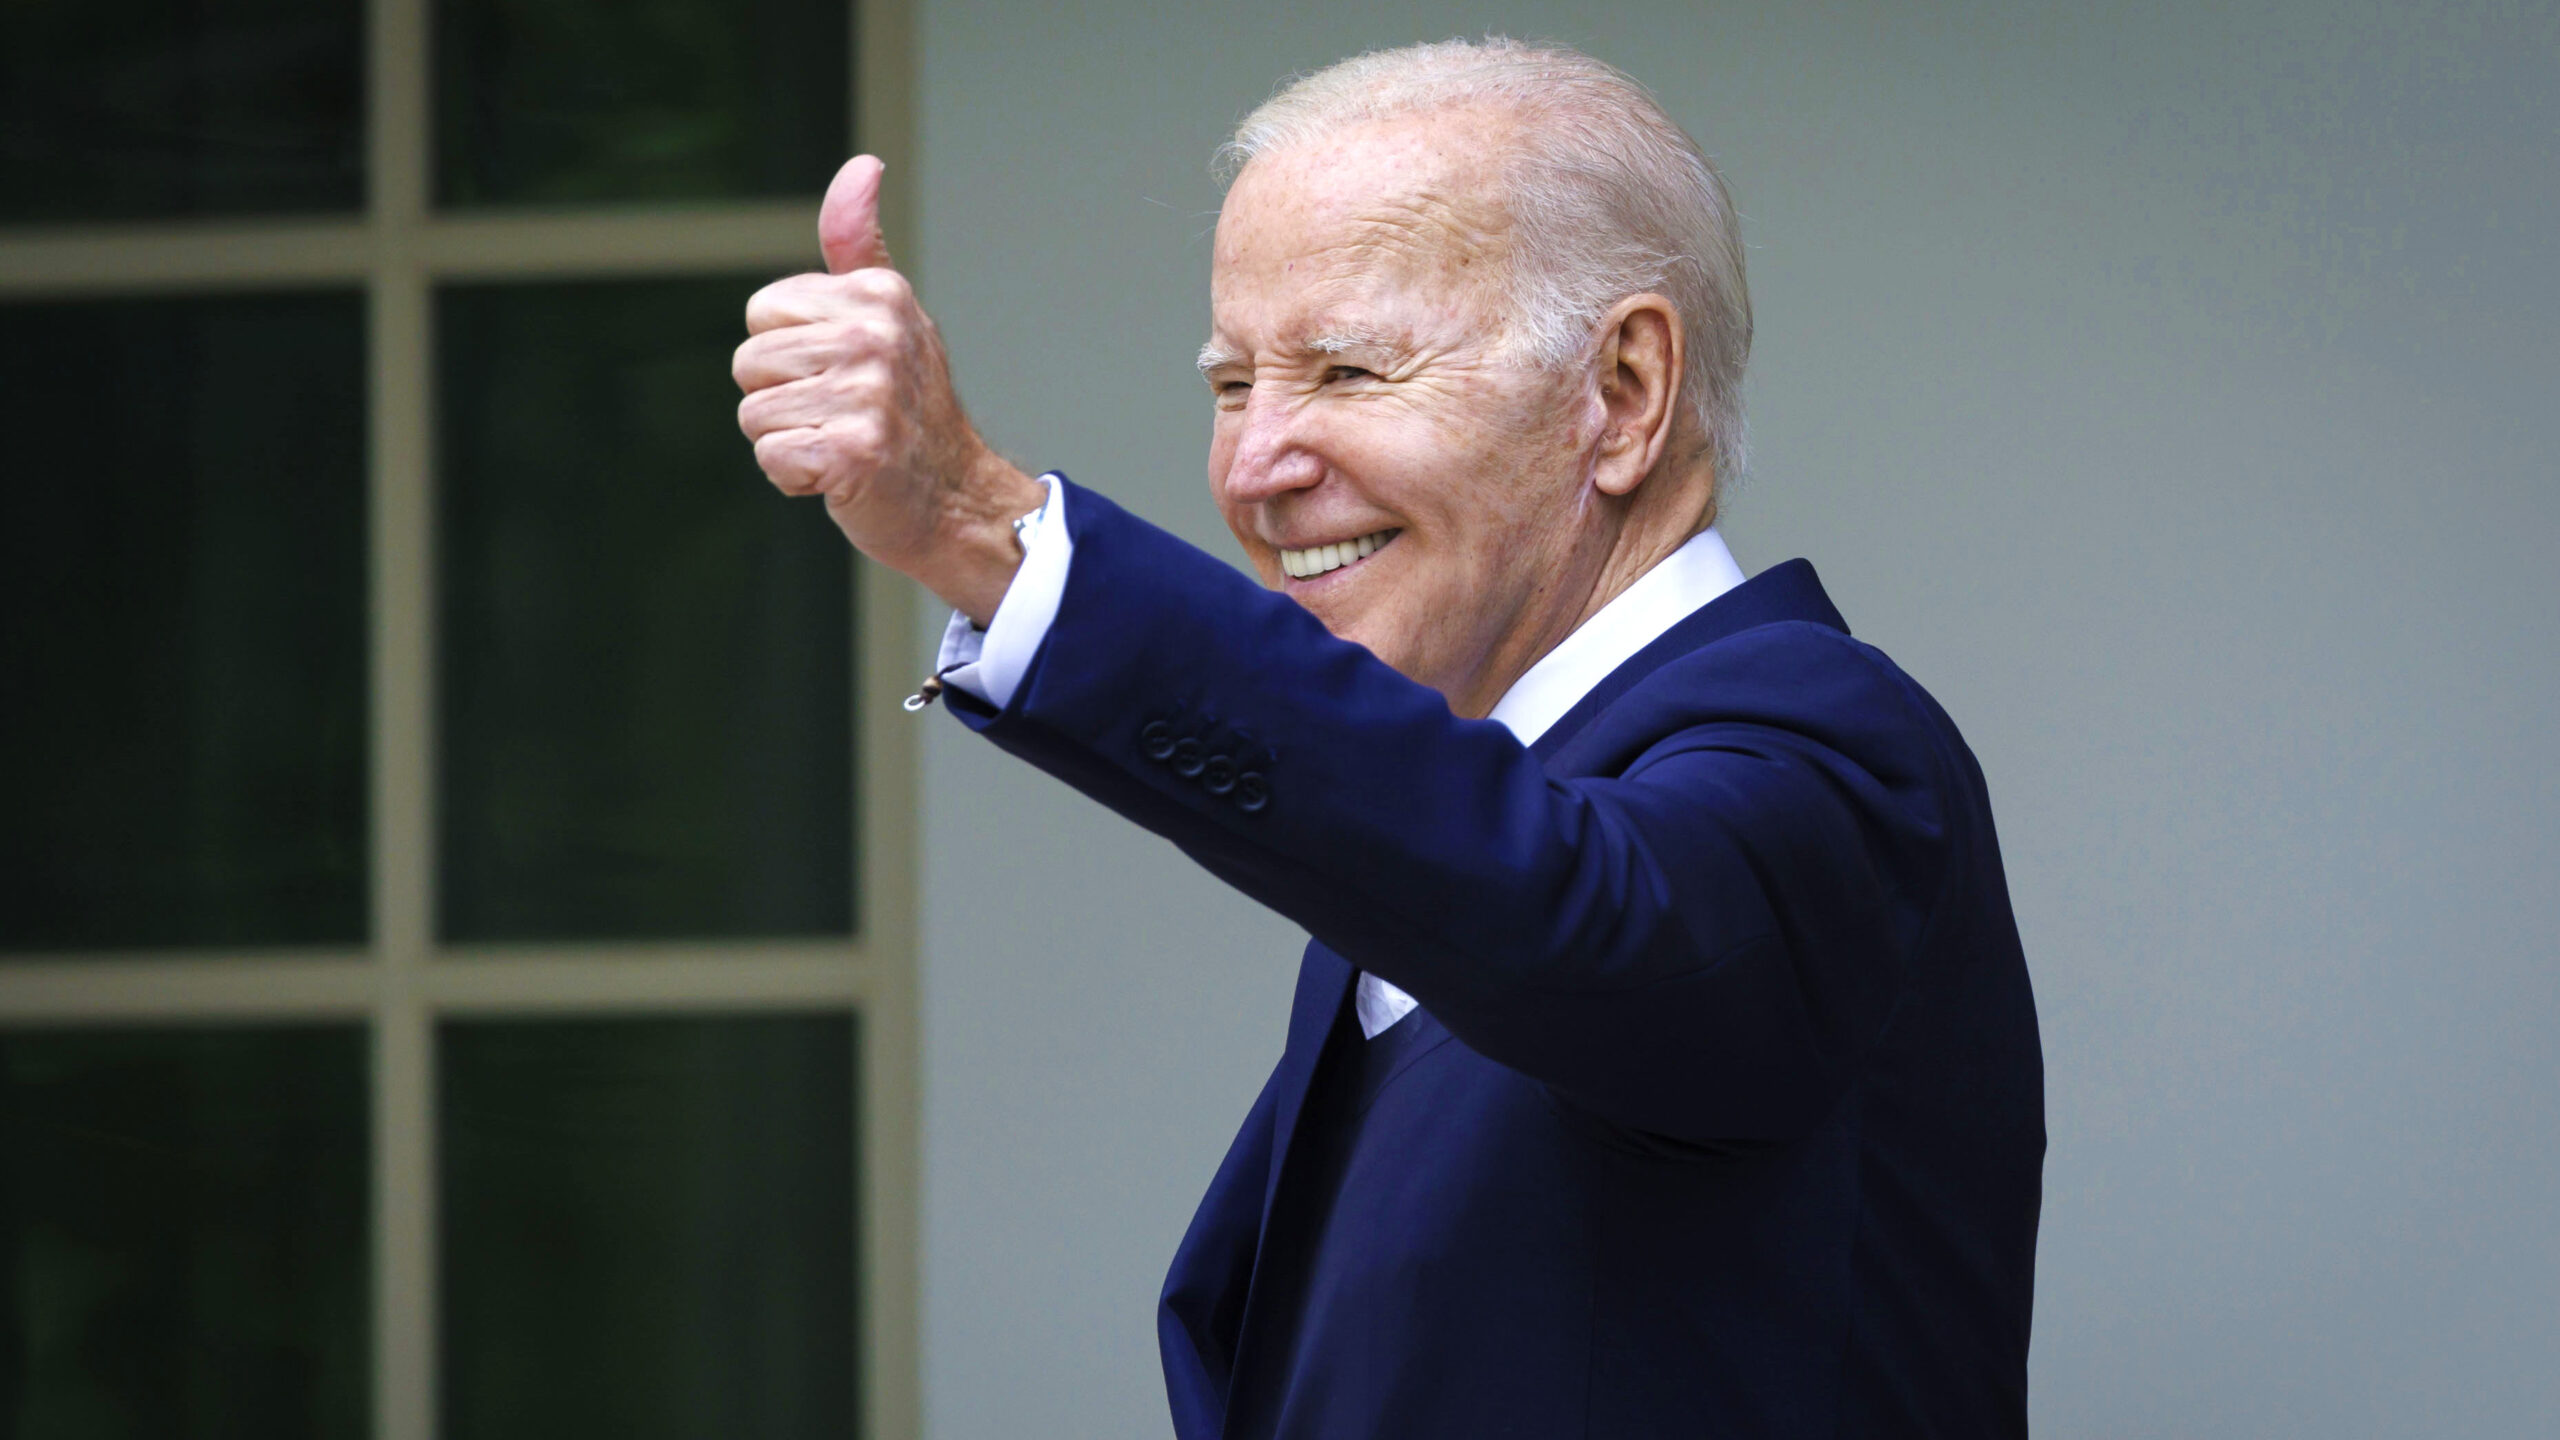 FBI has evidence of Biden’s bribery scheme with foreign national, says whistleblower.